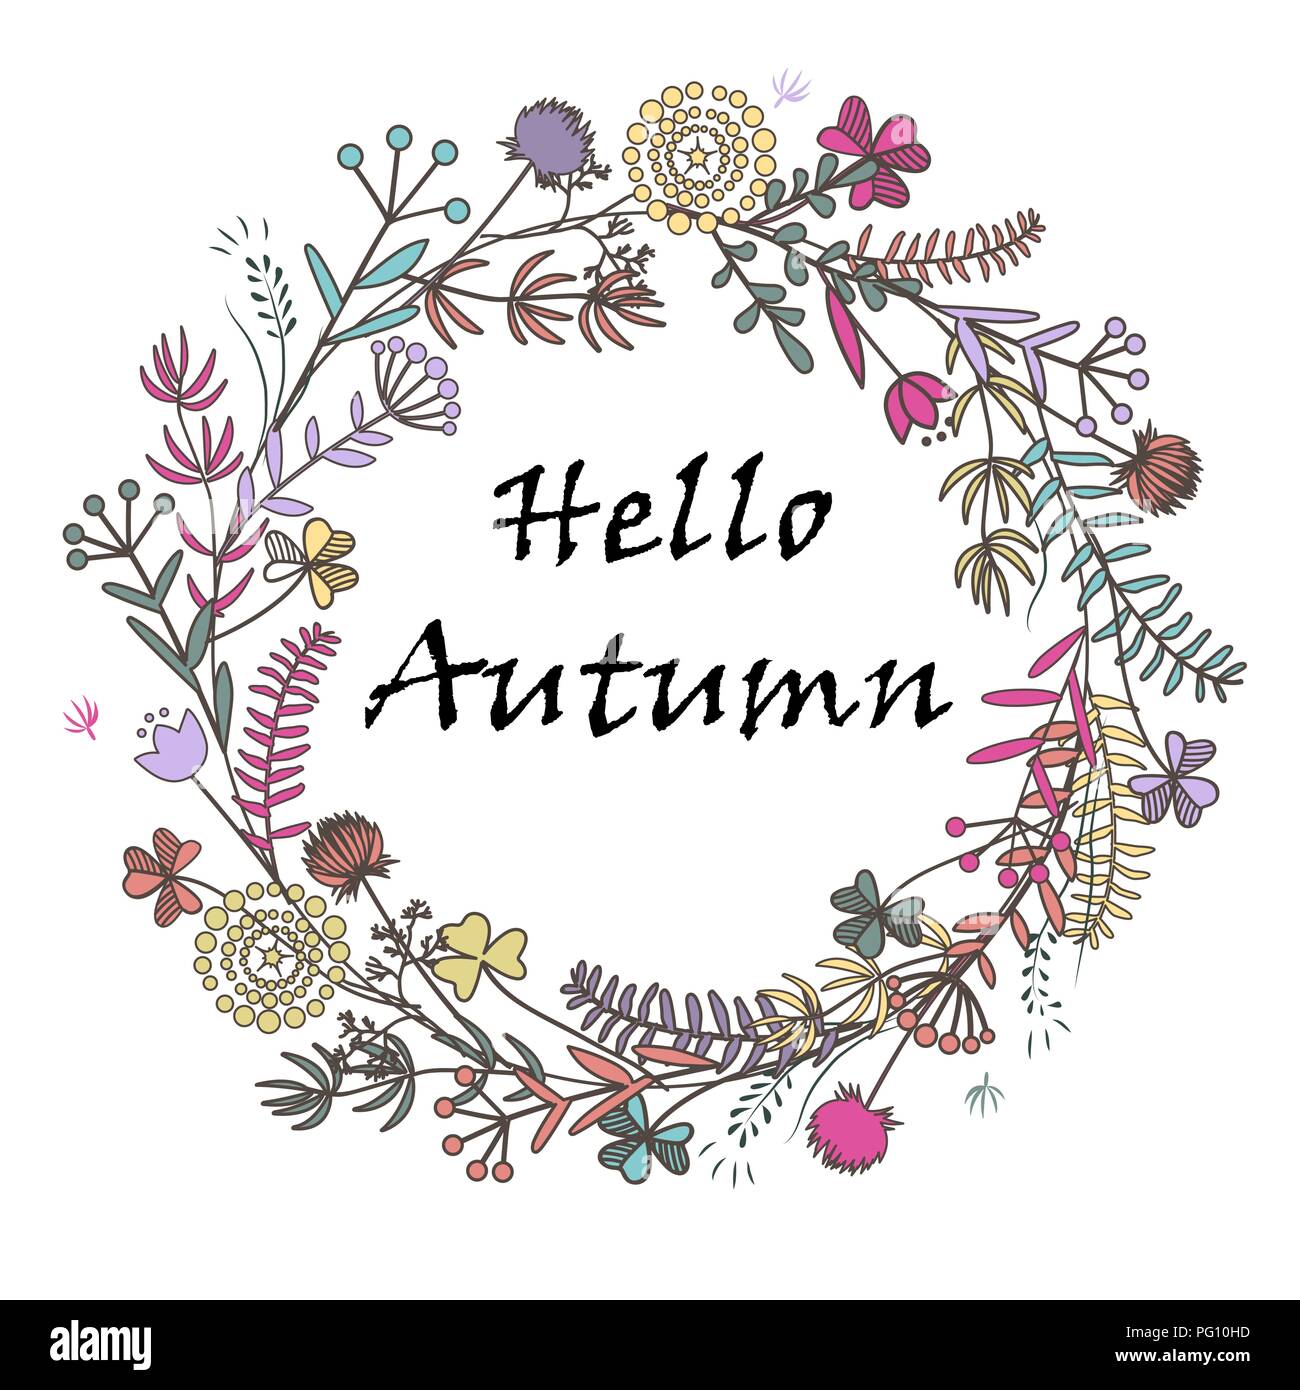 Hello Autumn hand drawn wreath with doodle meadow herbs. Frame background for sale announcement, cosmetic packaging, greeting cards, and banners desig Stock Vector